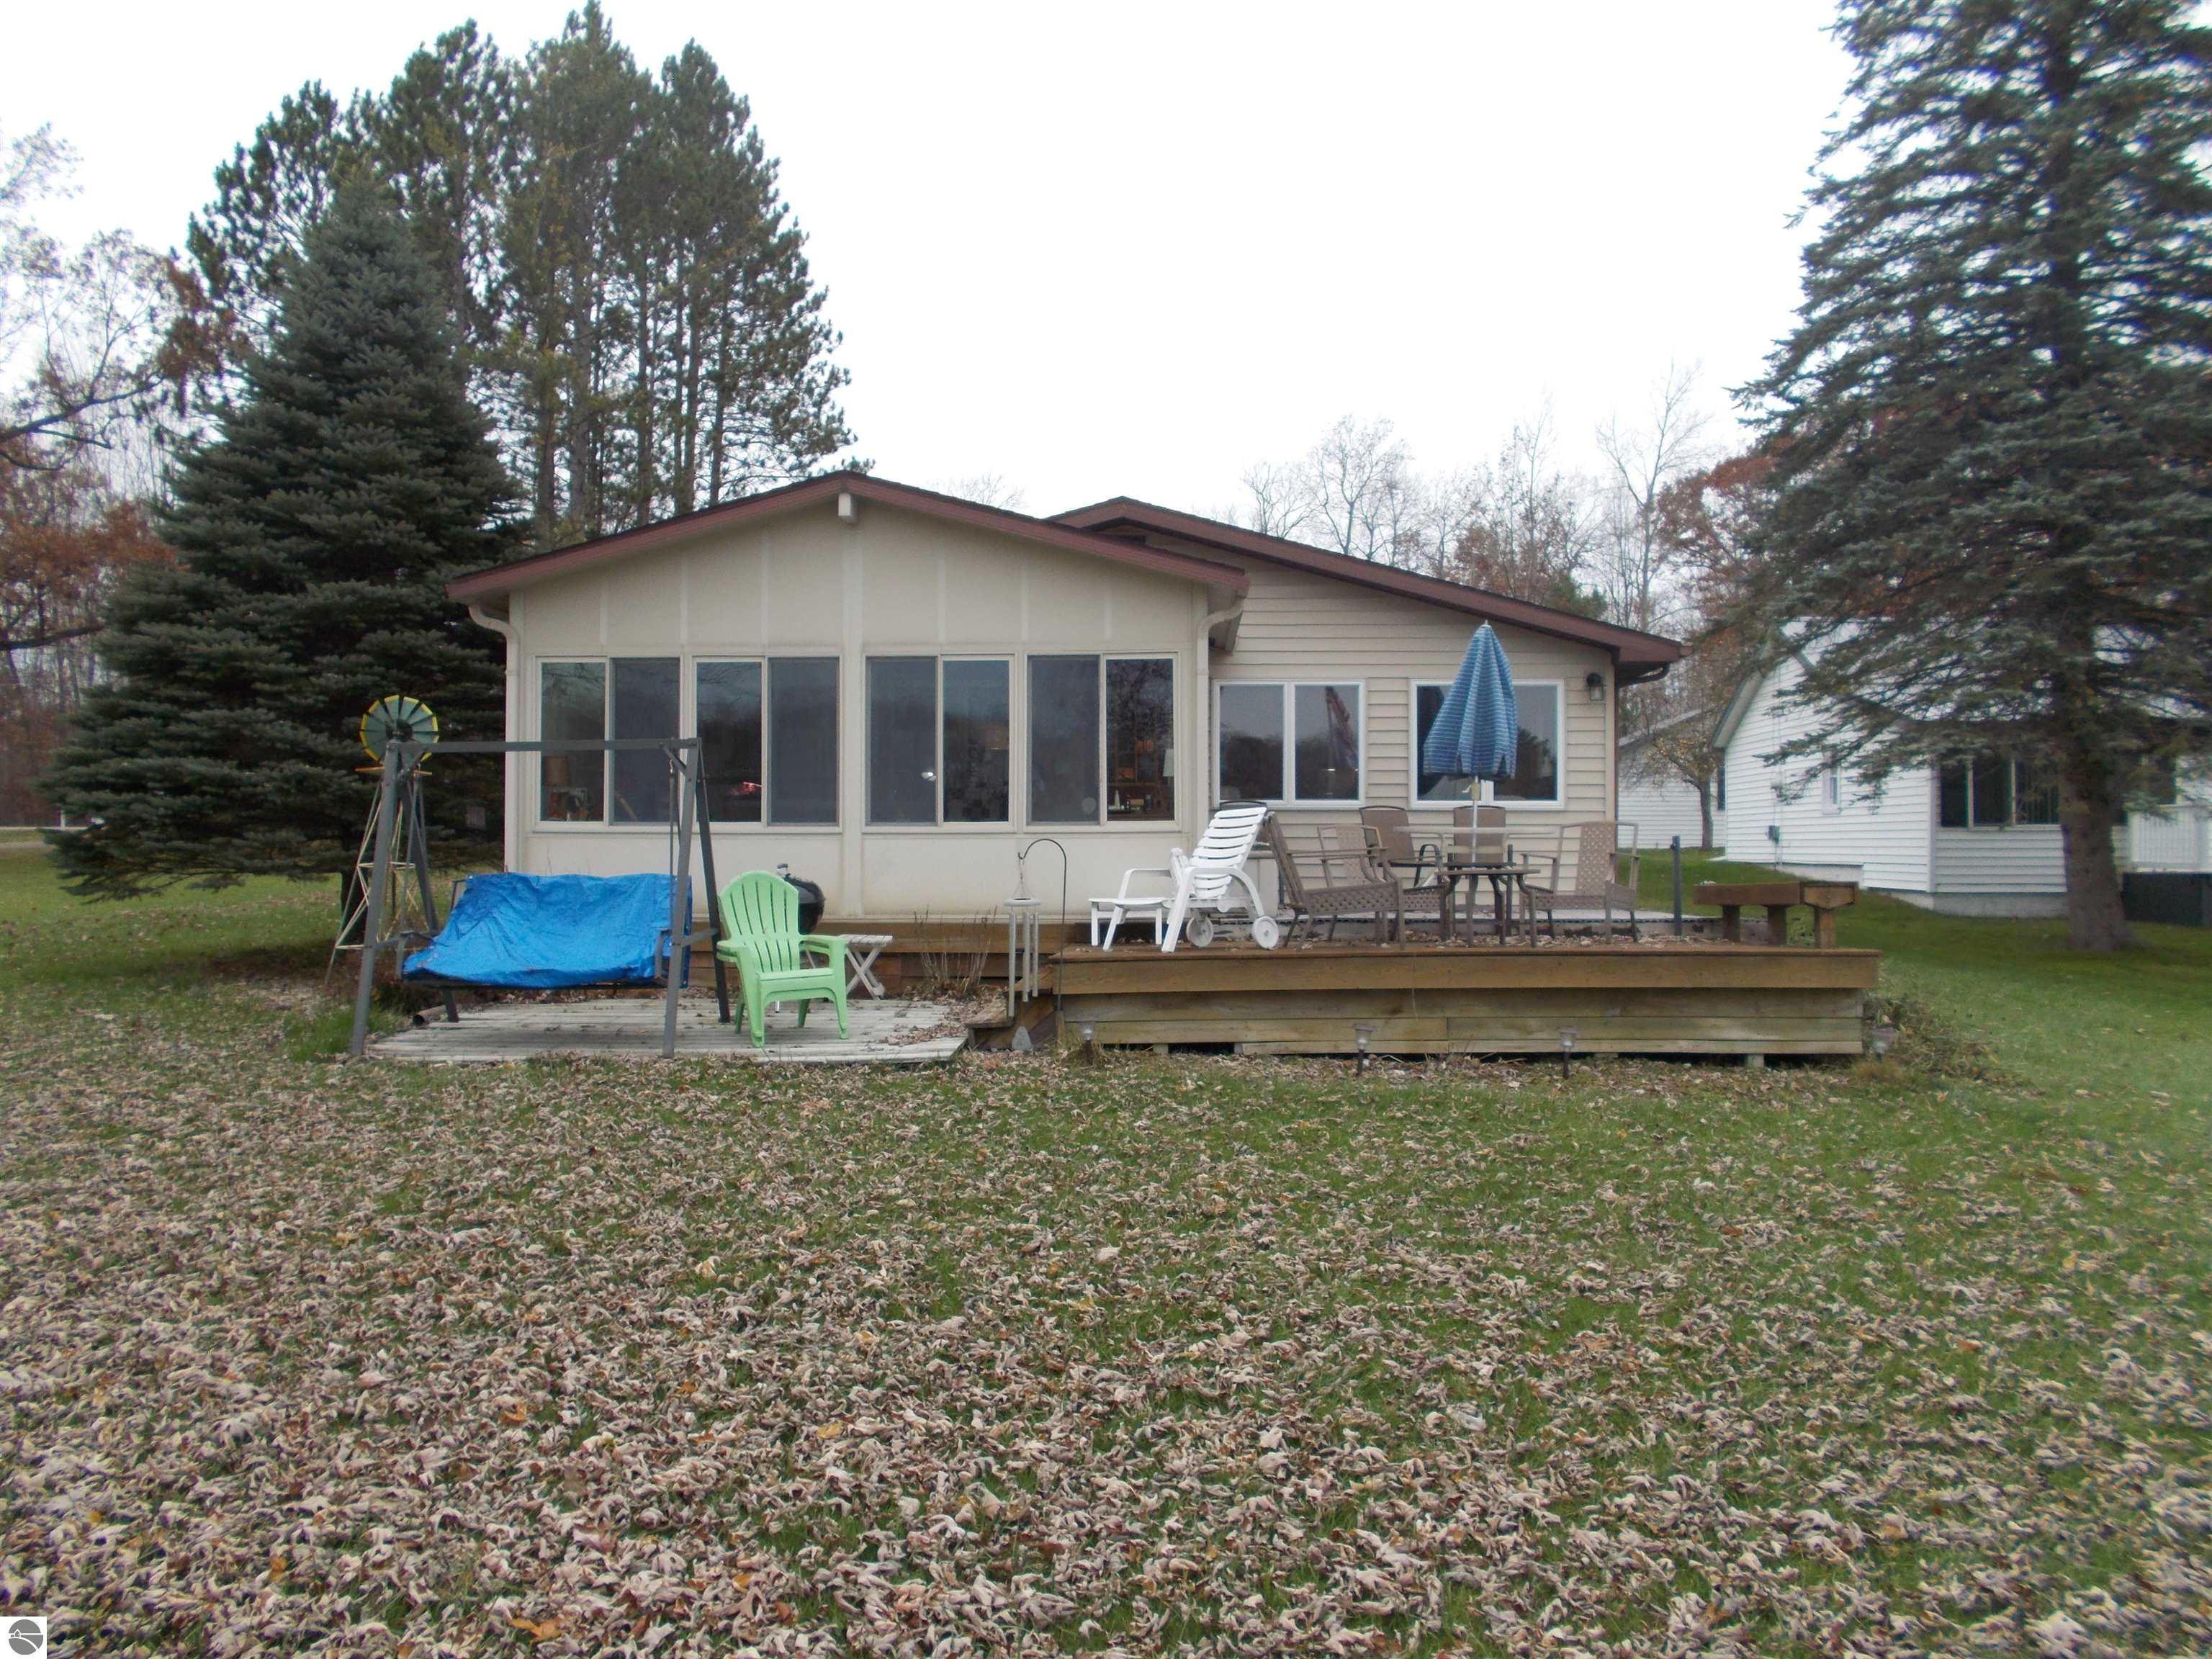 8485 Lakeview, Hale, MI 48739 photo 43 of 52